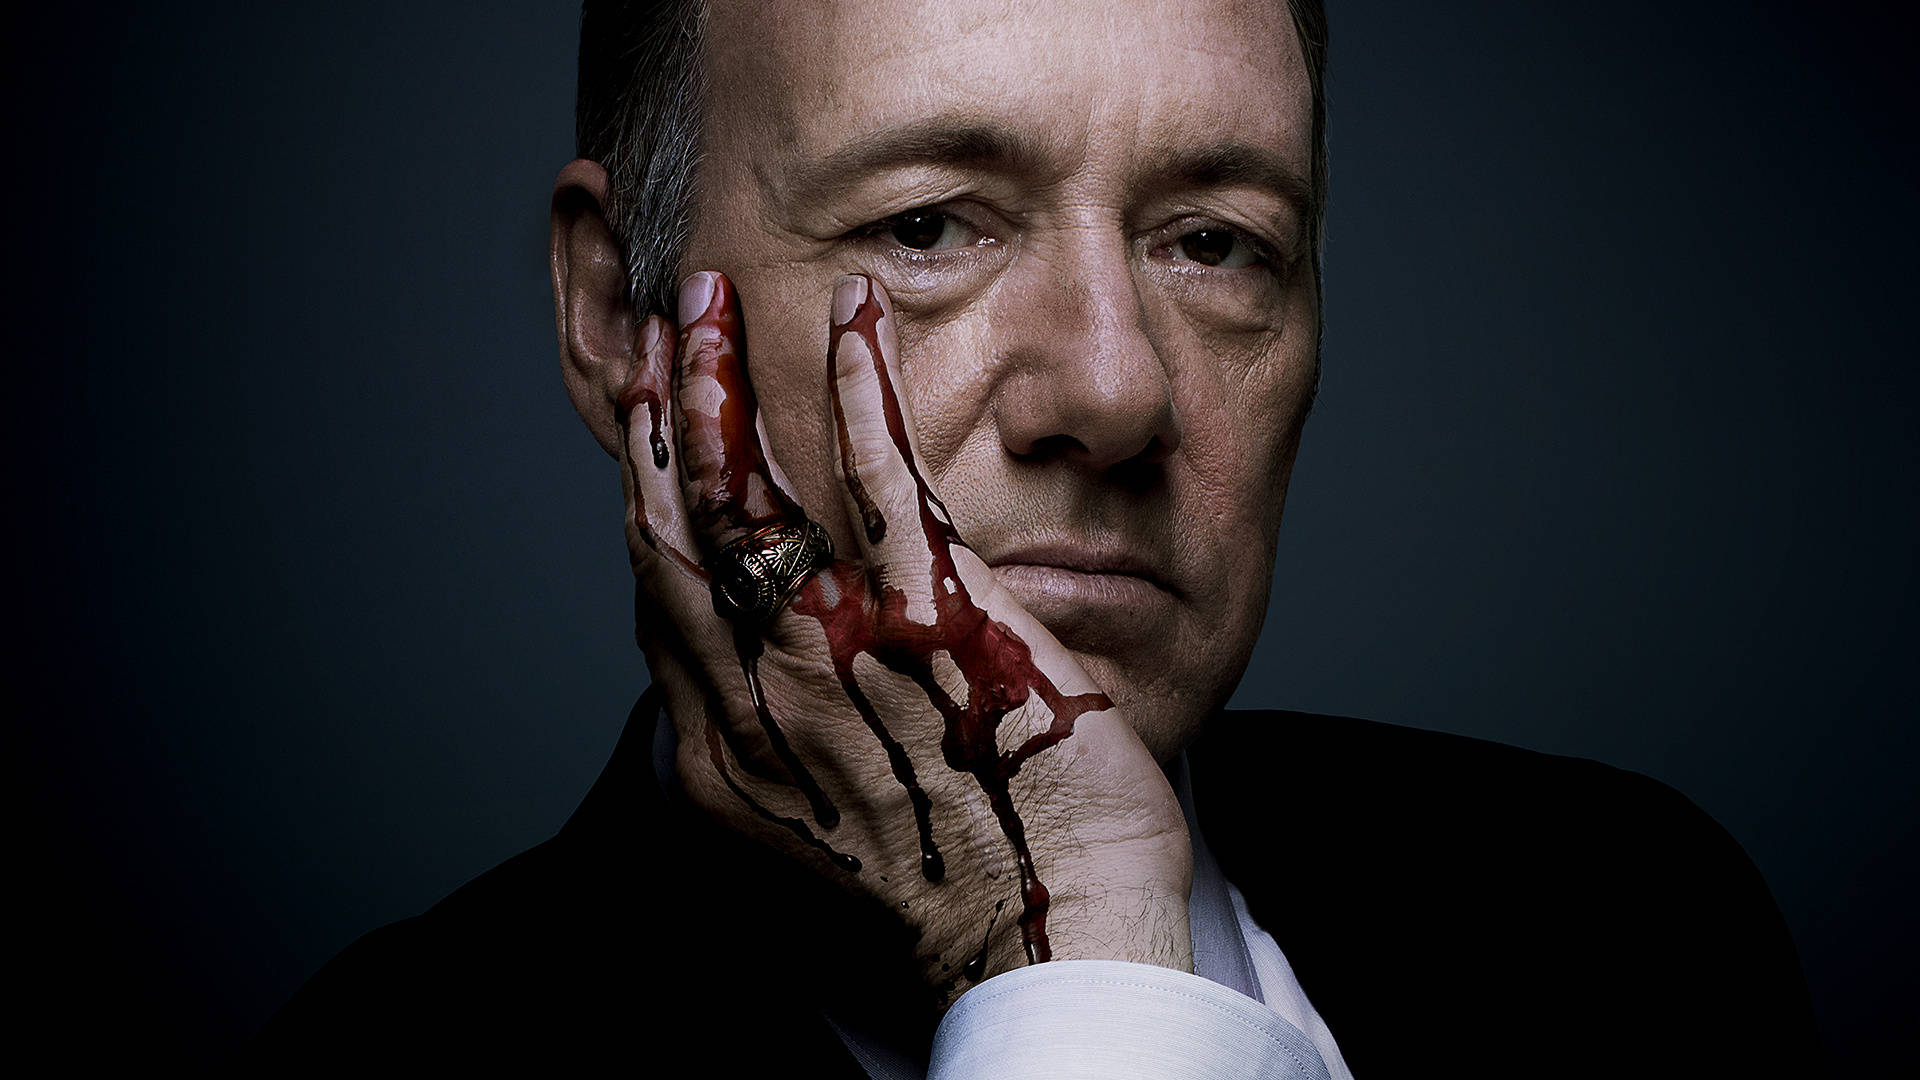 Kevin Spacey 1920 X 1080 Wallpaper